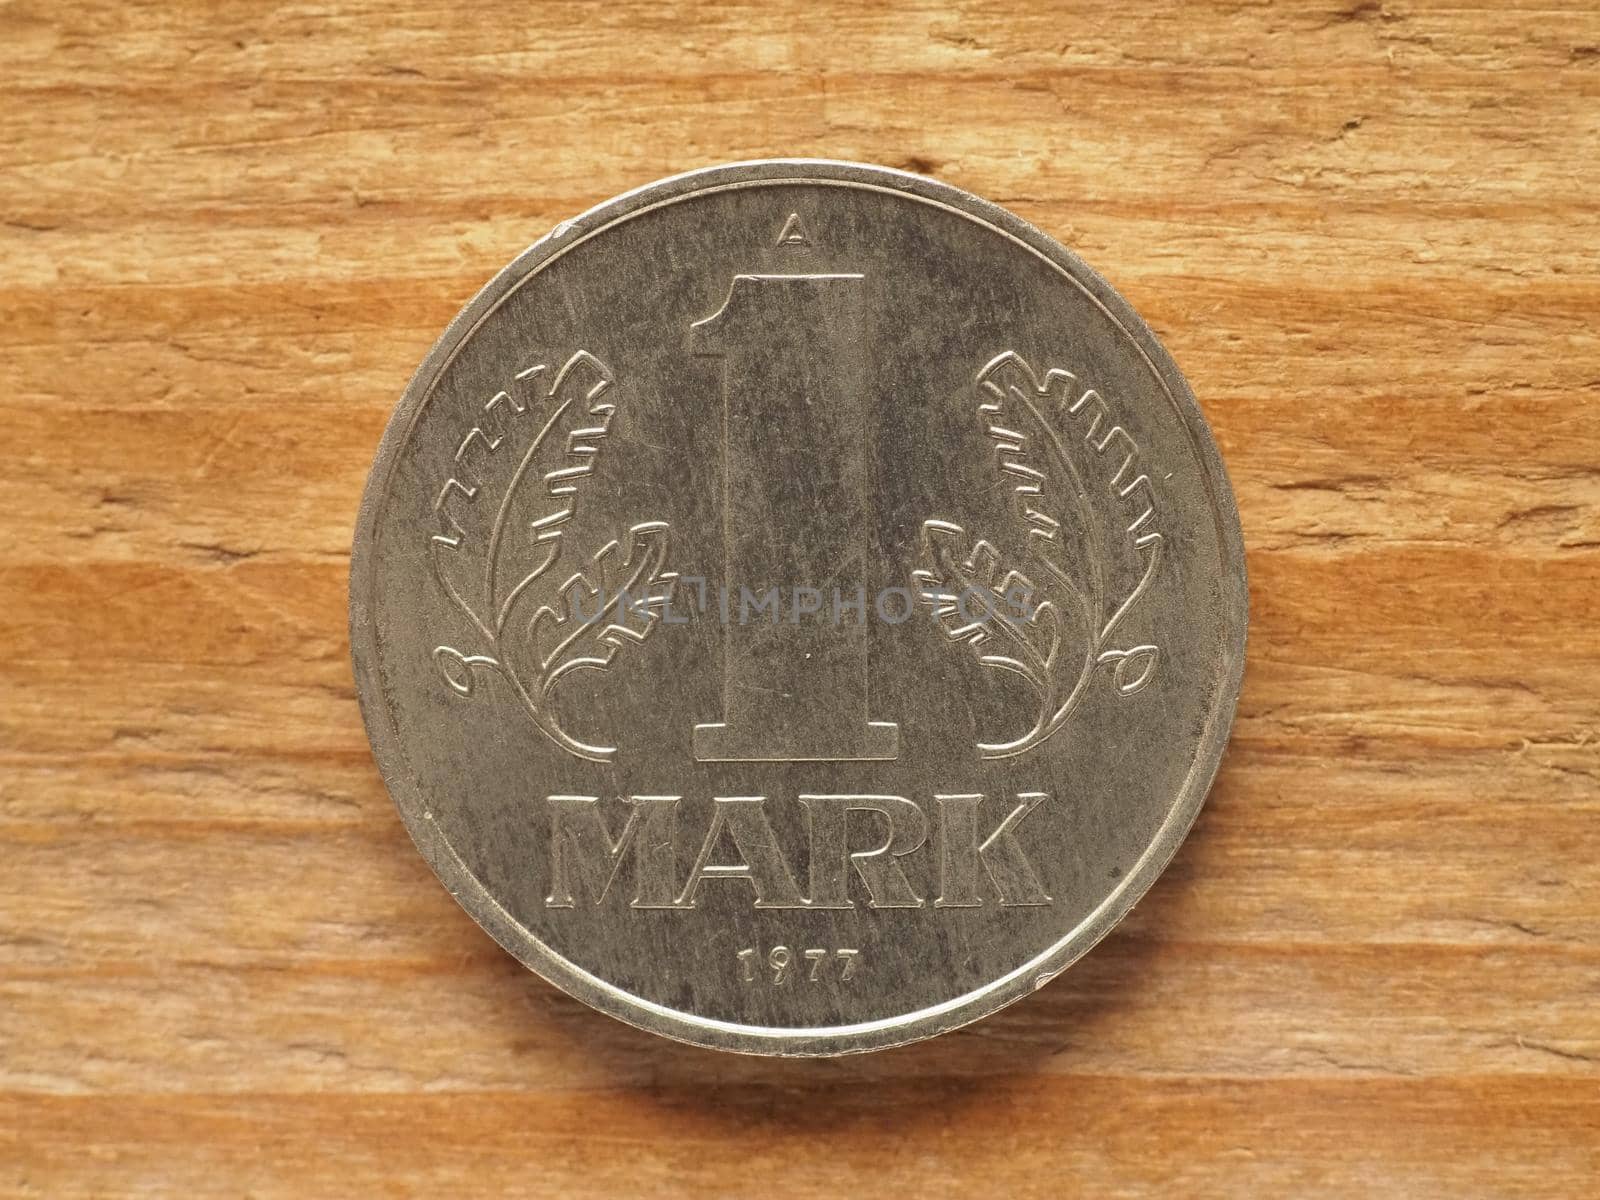 currency of East Germany, one mark coin reverse